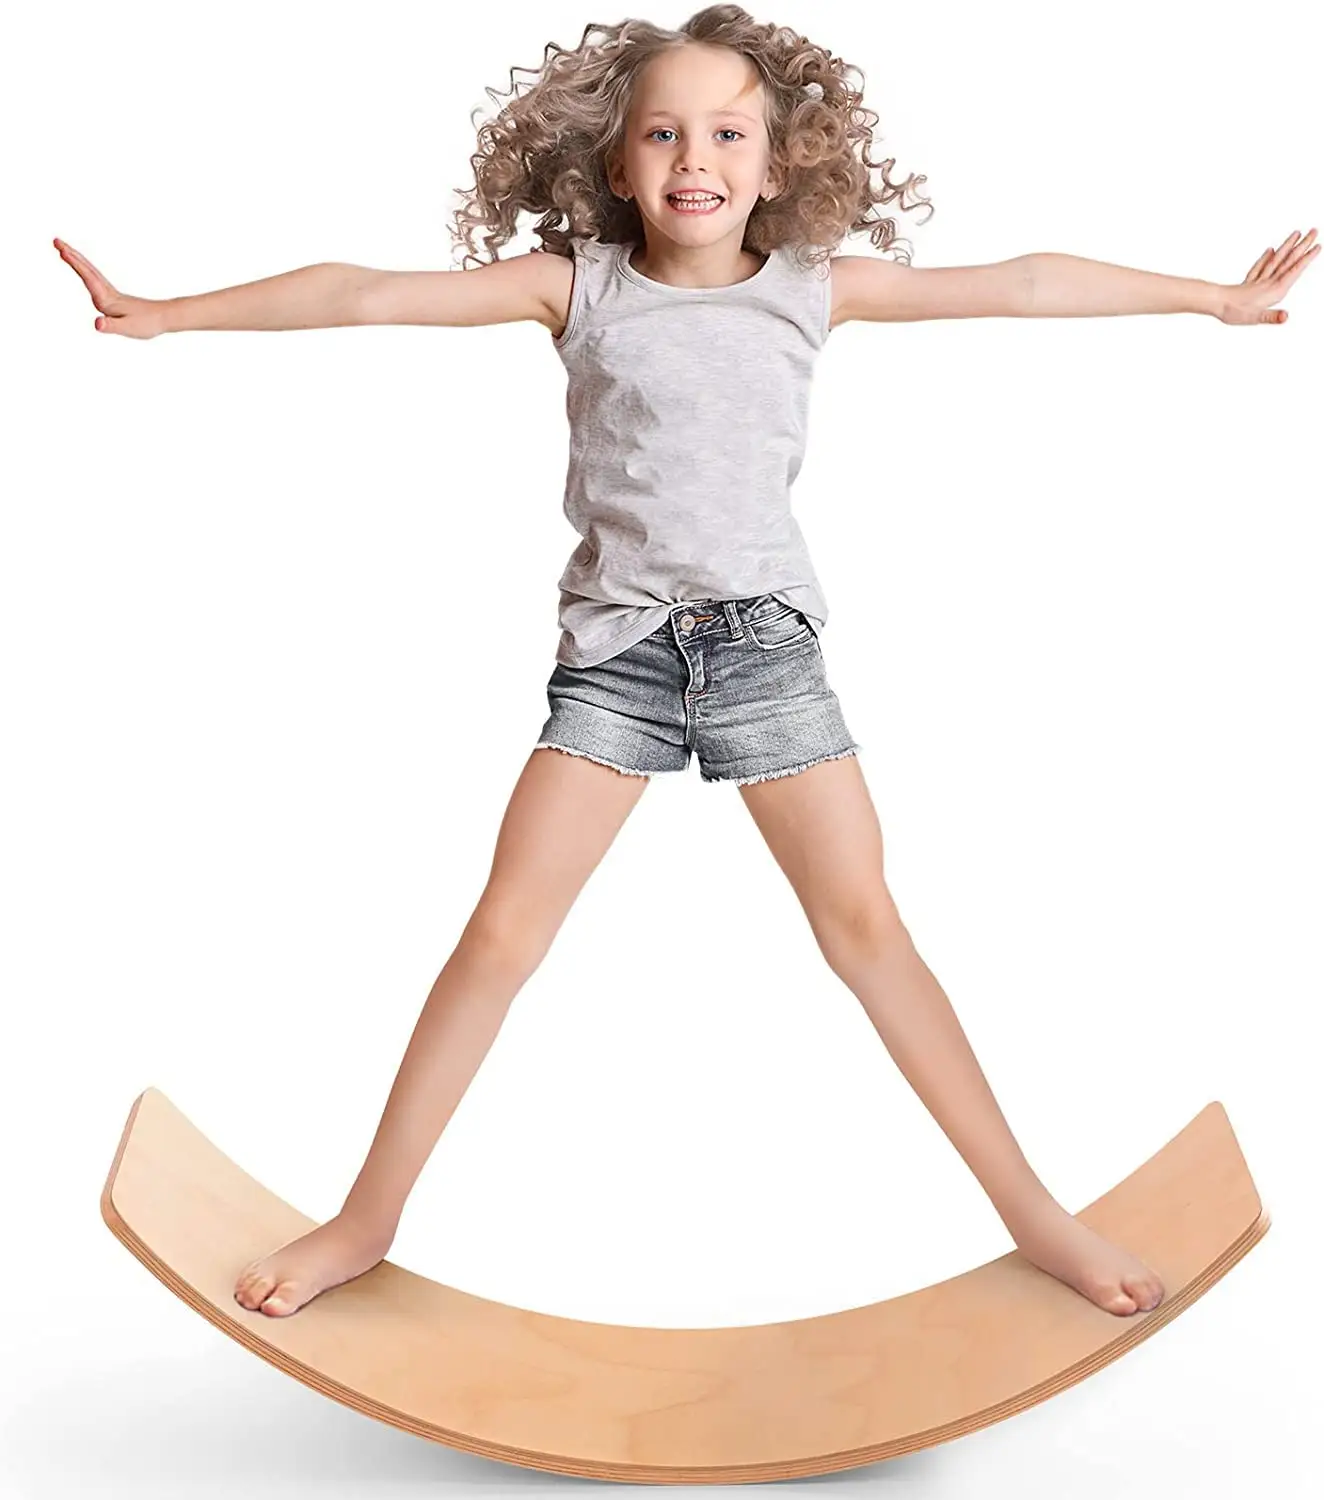 Wooden Balance Board Birthday Gifts for 3 4 5 6 7 8 Year Old Boys Girls Kids